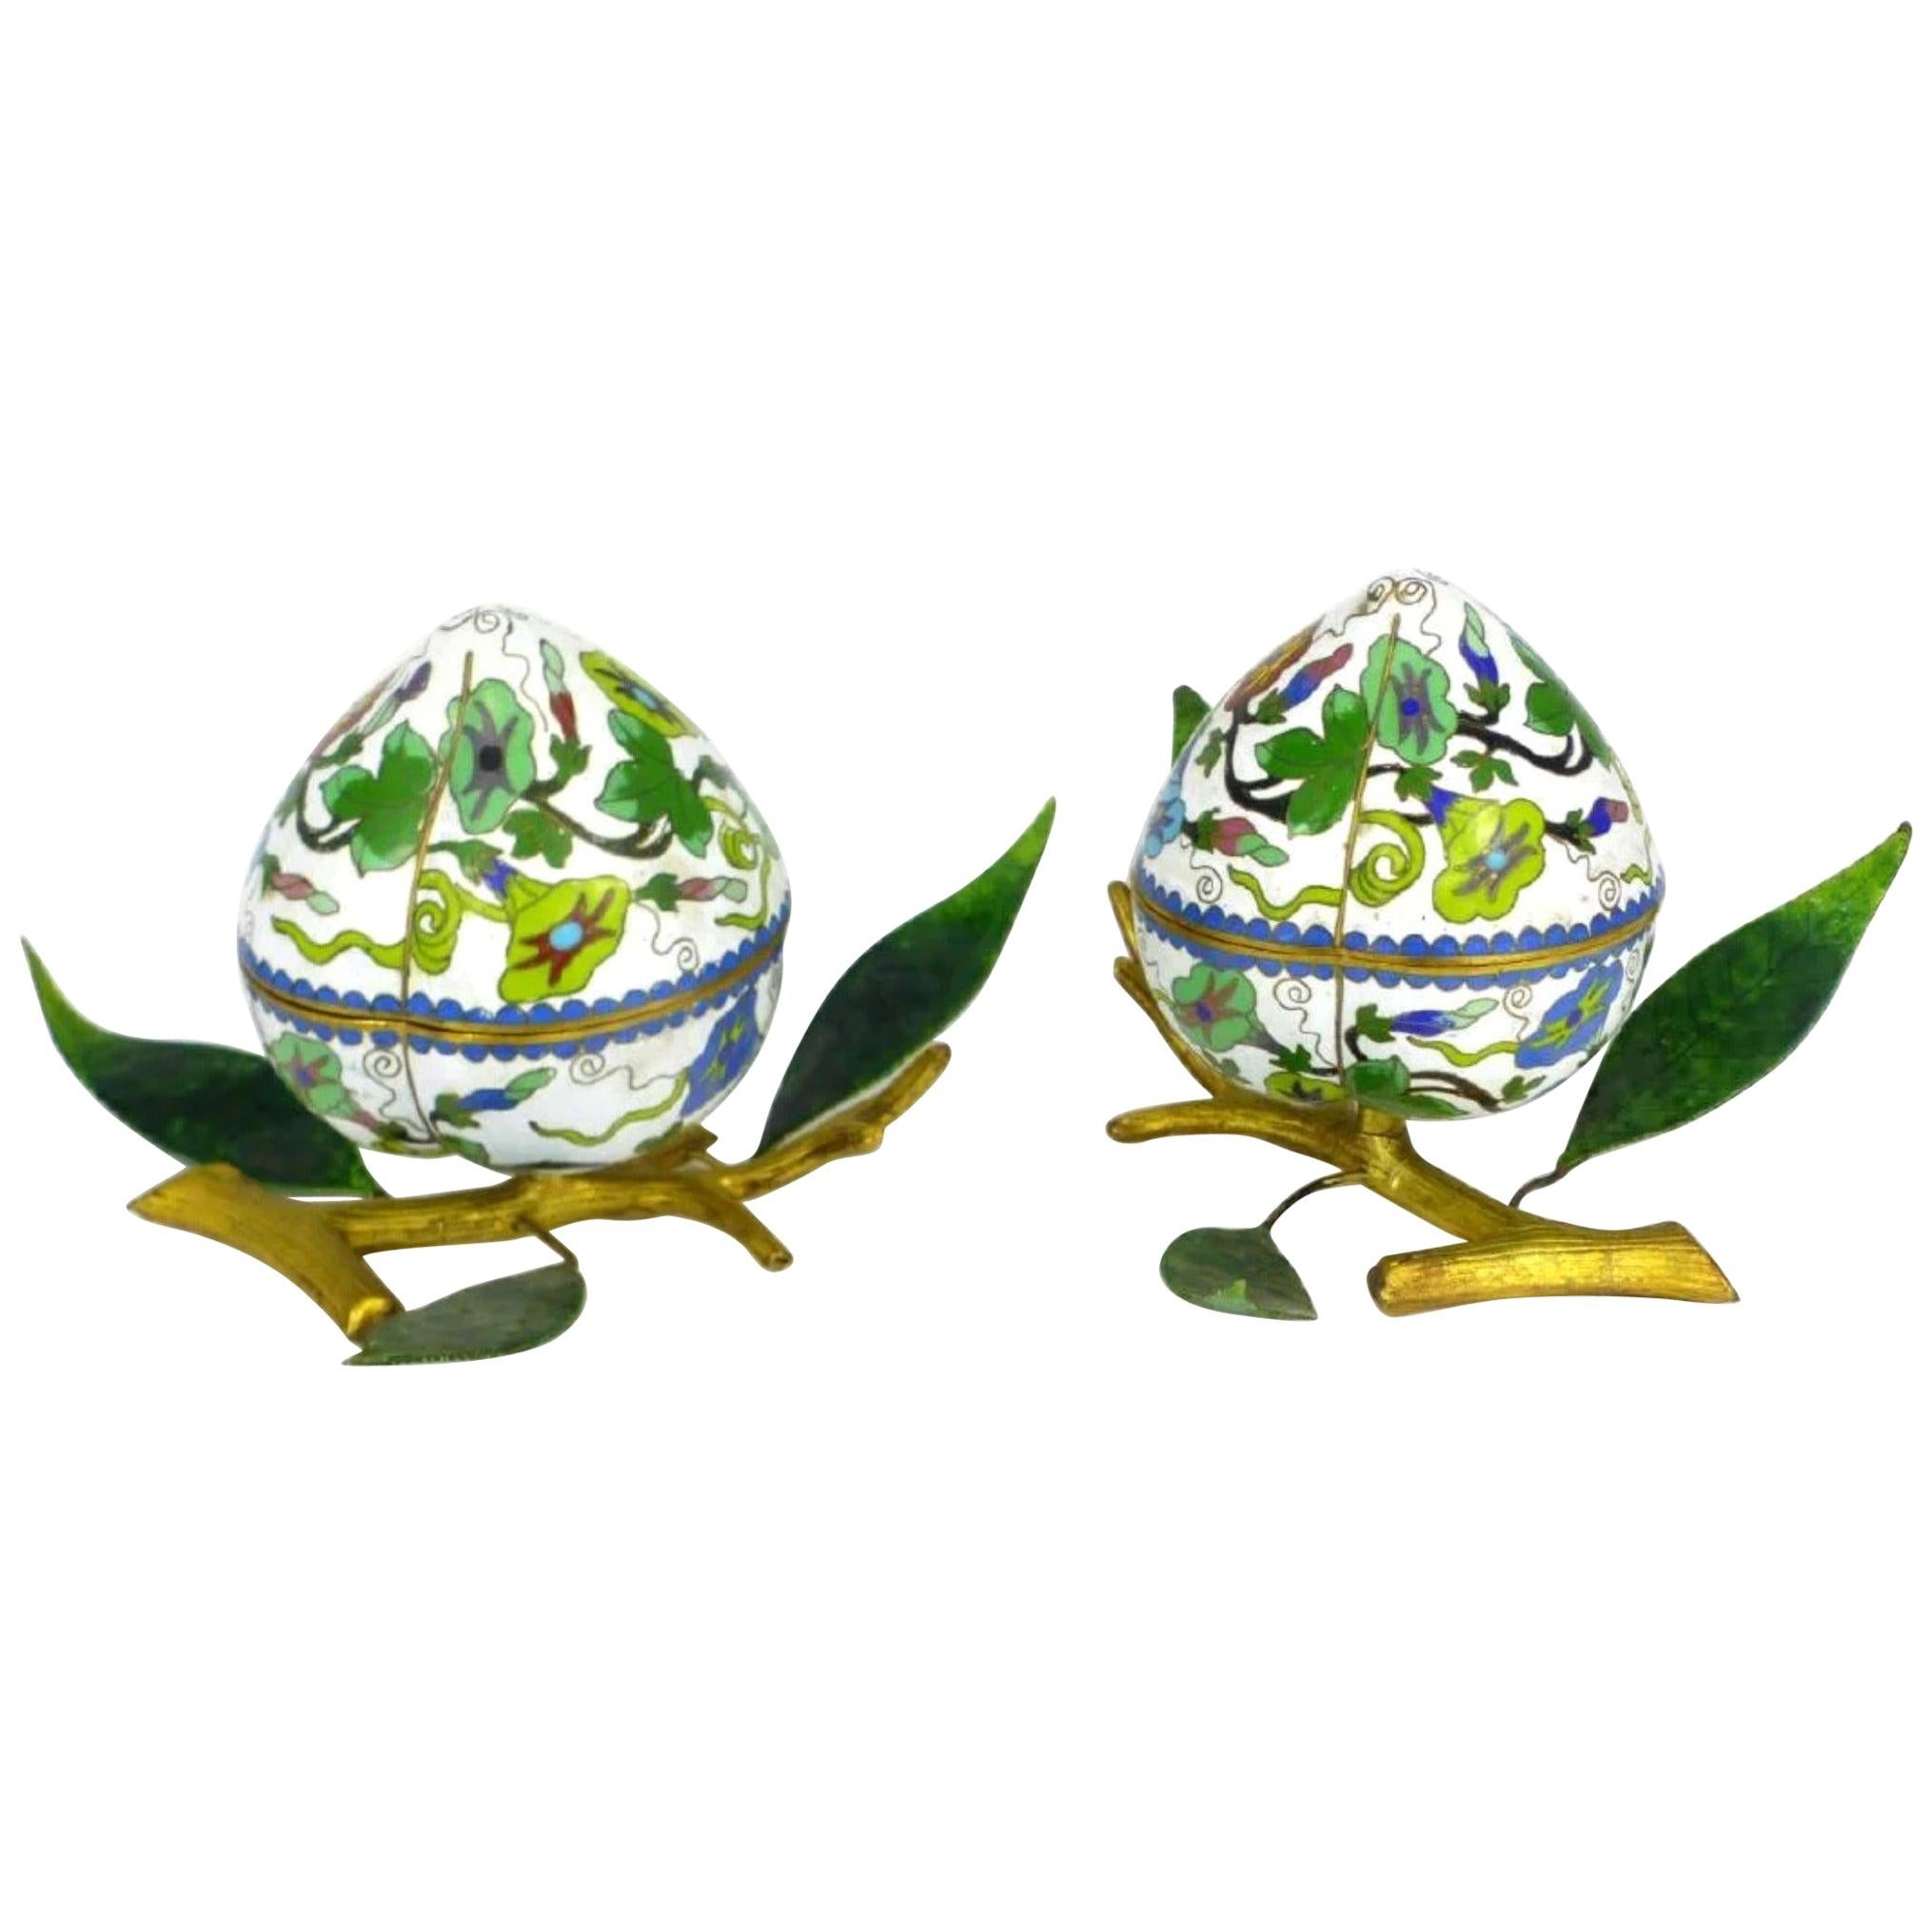 Pair of Chinese Cloisonné Enamel Peach-Form Box and Cover, circa 1910-1940 For Sale